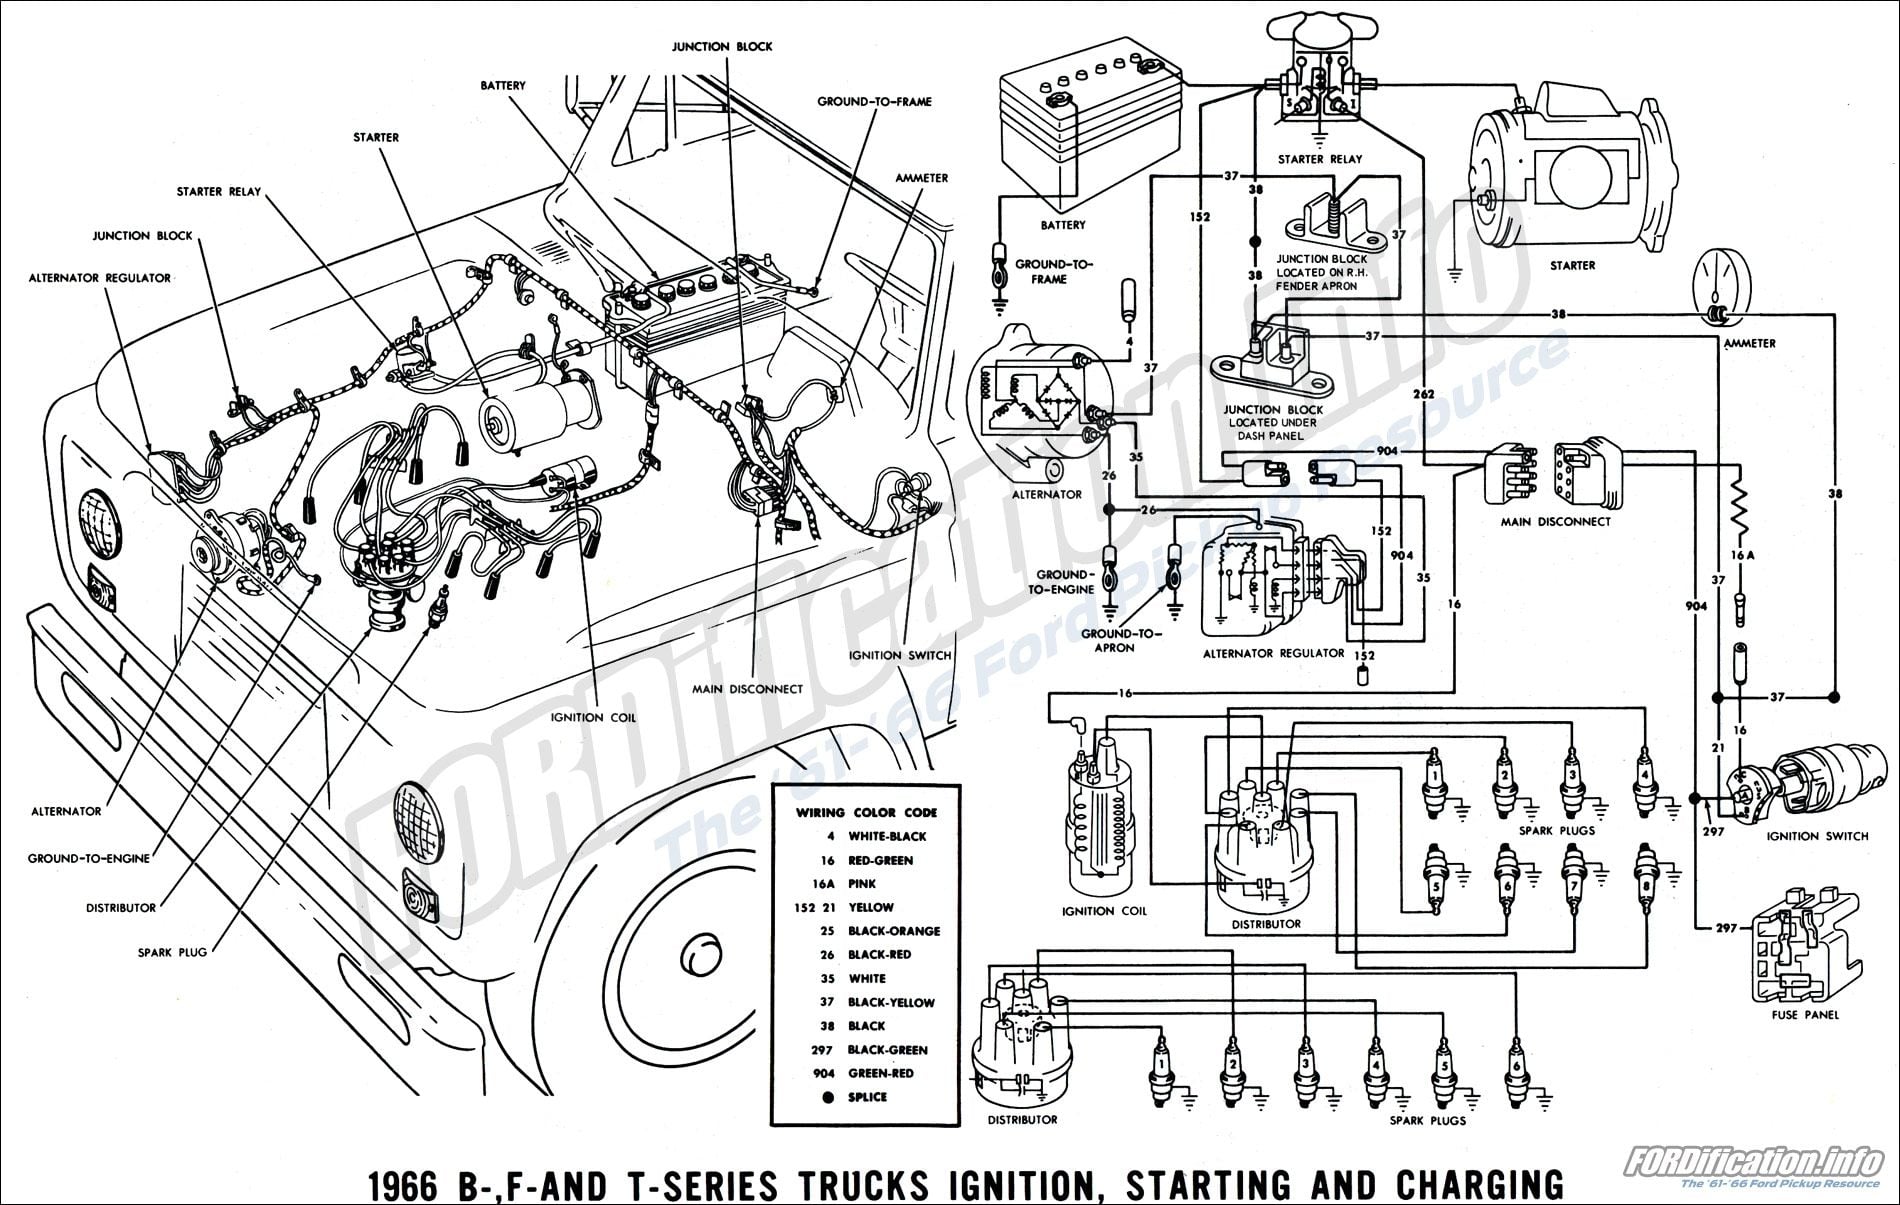 Ignition Coil Wiring Diagram - Ford Truck Enthusiasts Forums